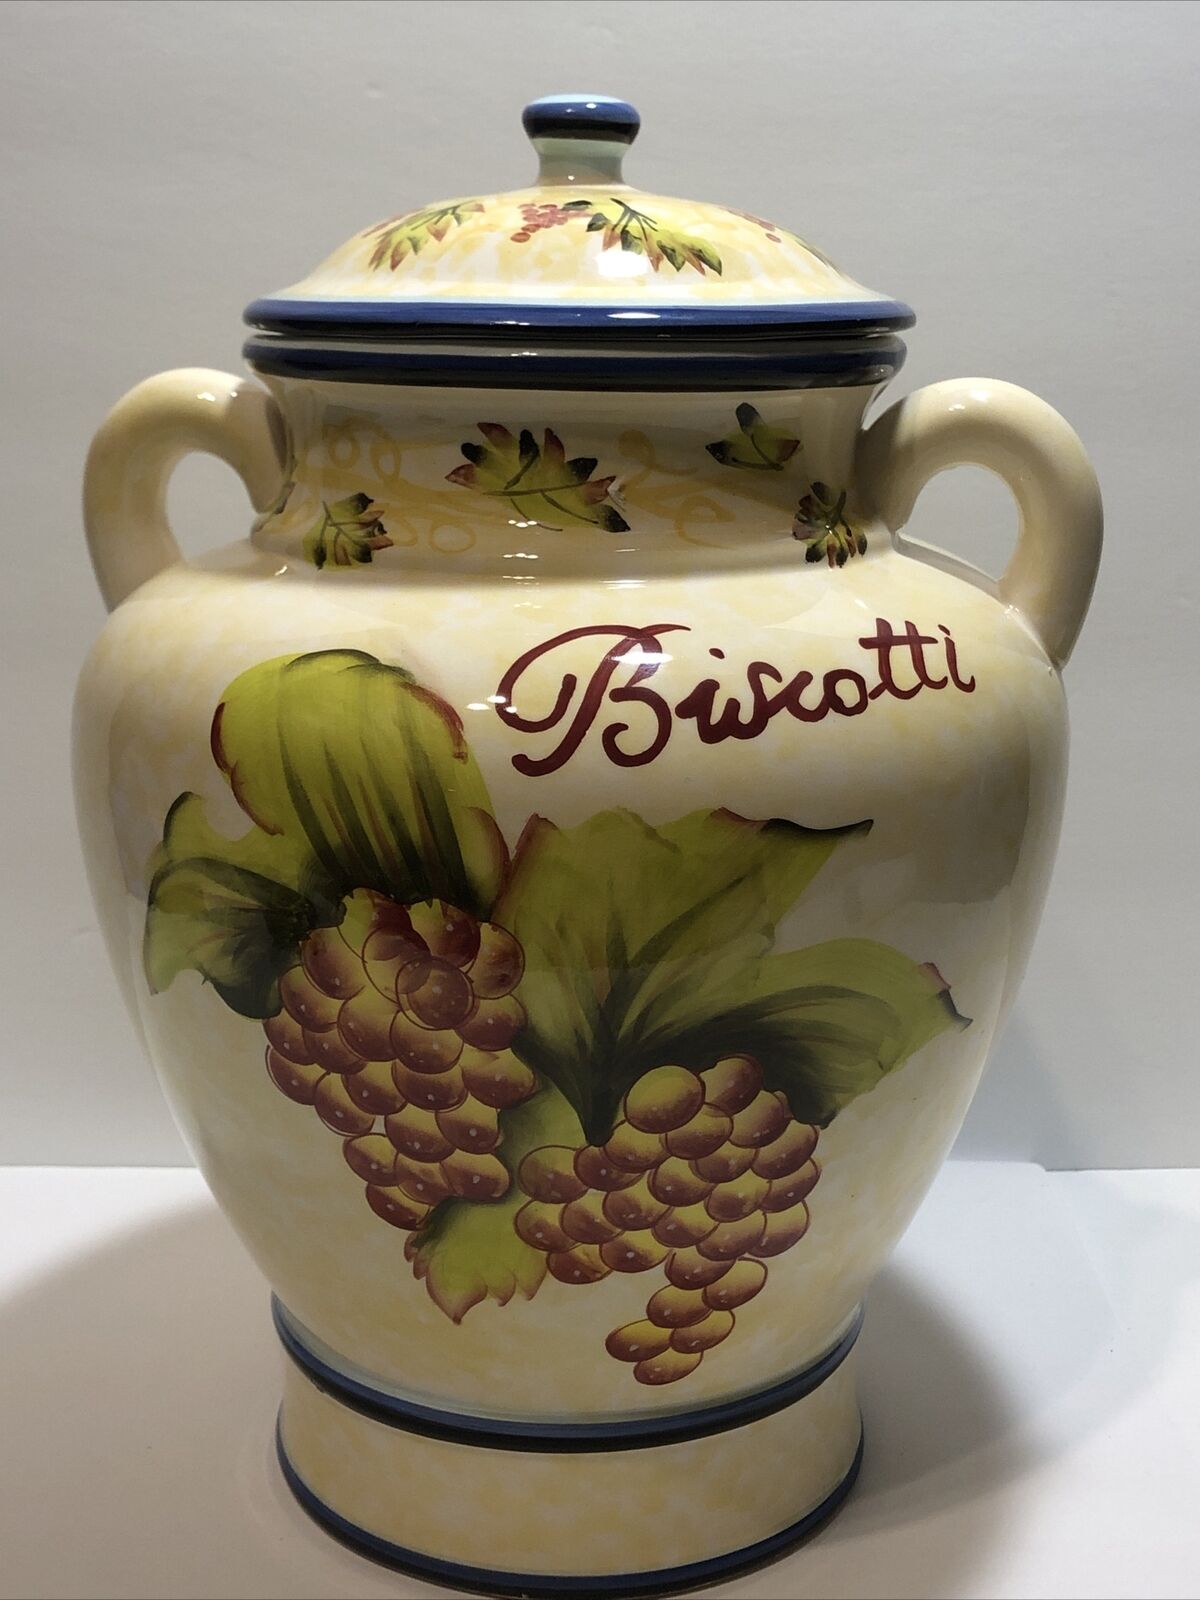 Vintage 11.5” Italian Biscotti Ceramic Cookie Jar hand painted for Nonni’s